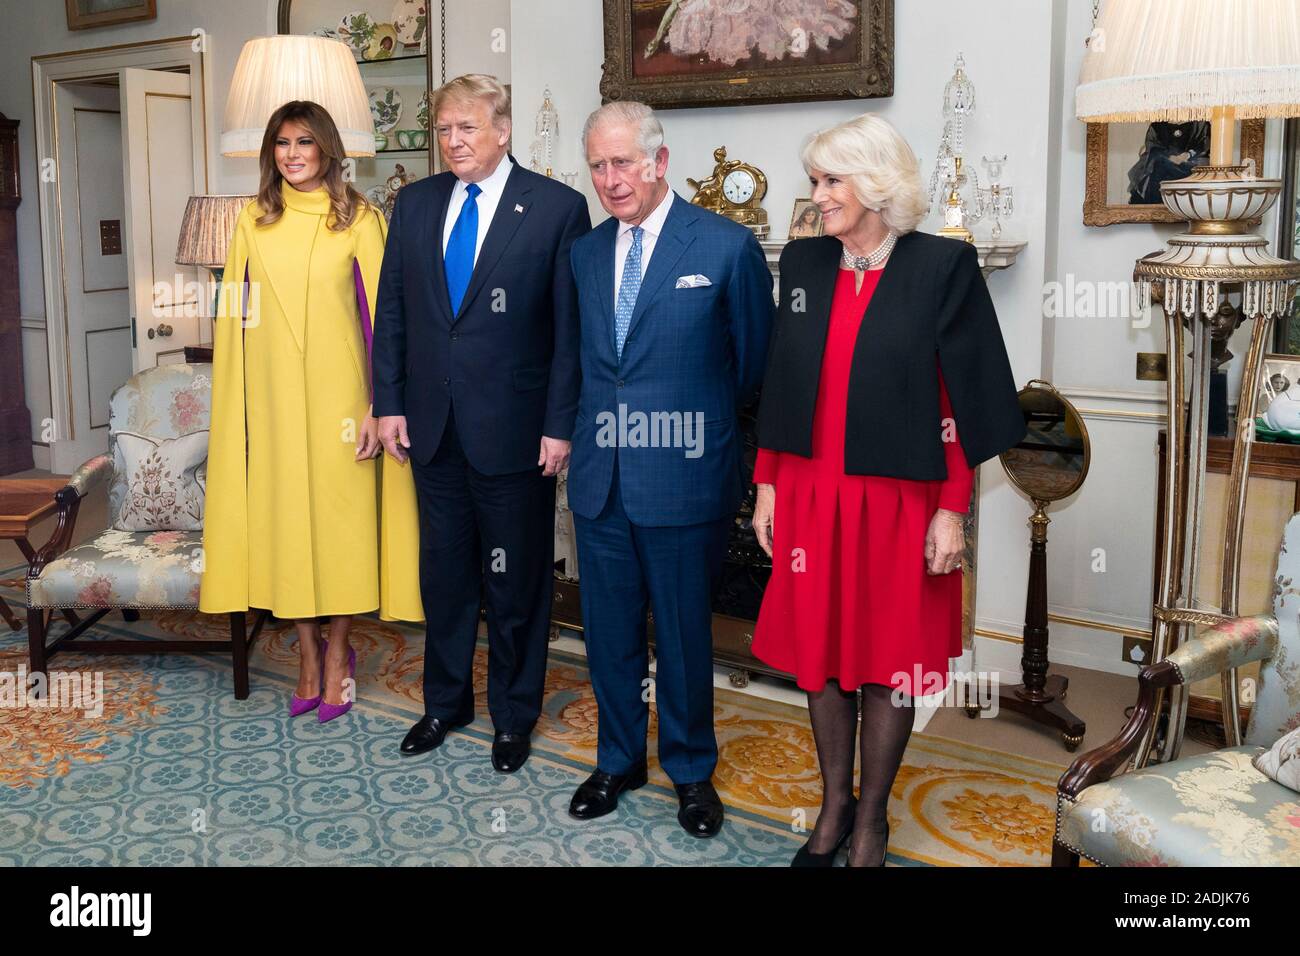 London, United Kingdom. 03 December, 2019. U.S. President Donald Trump, First Lady Melania Trump, Prince Charles, Prince of Wales and Camilla, Duchess of Cornwall stand for a photo at Clarence House December 3, 2019 in London, United Kingdom.   Credit: Shealah Craighead/Planetpix/Alamy Live News Stock Photo